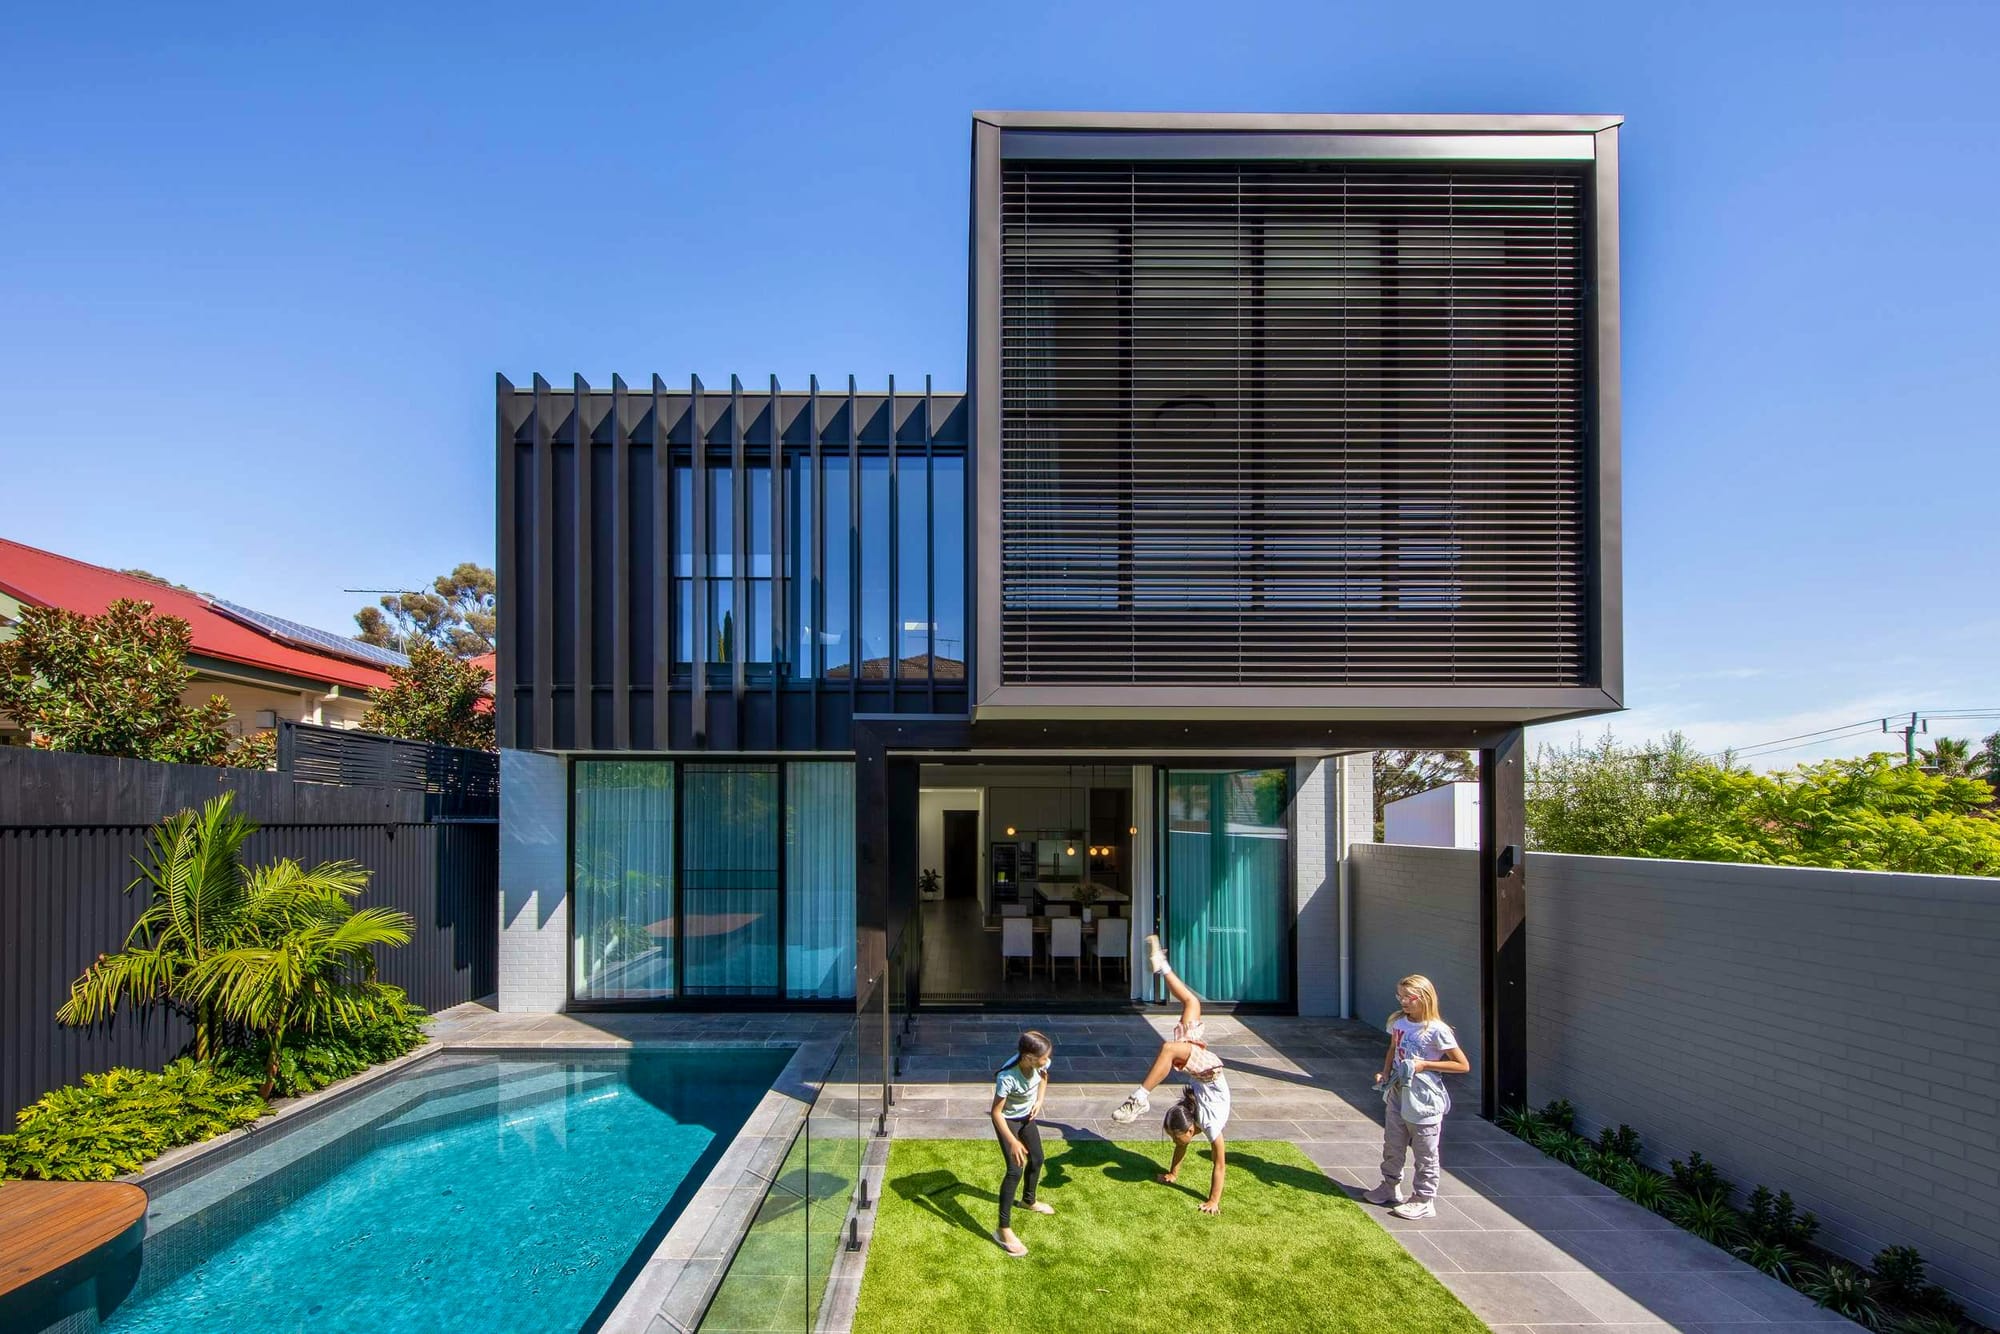 Northcote Renovation by Chan Architecture. Photography by Tatjana Plitt. Raer facade of contemporary double storey family home. Pool on left hand side of backyard. Children play on grass to right hand side of backyard. 